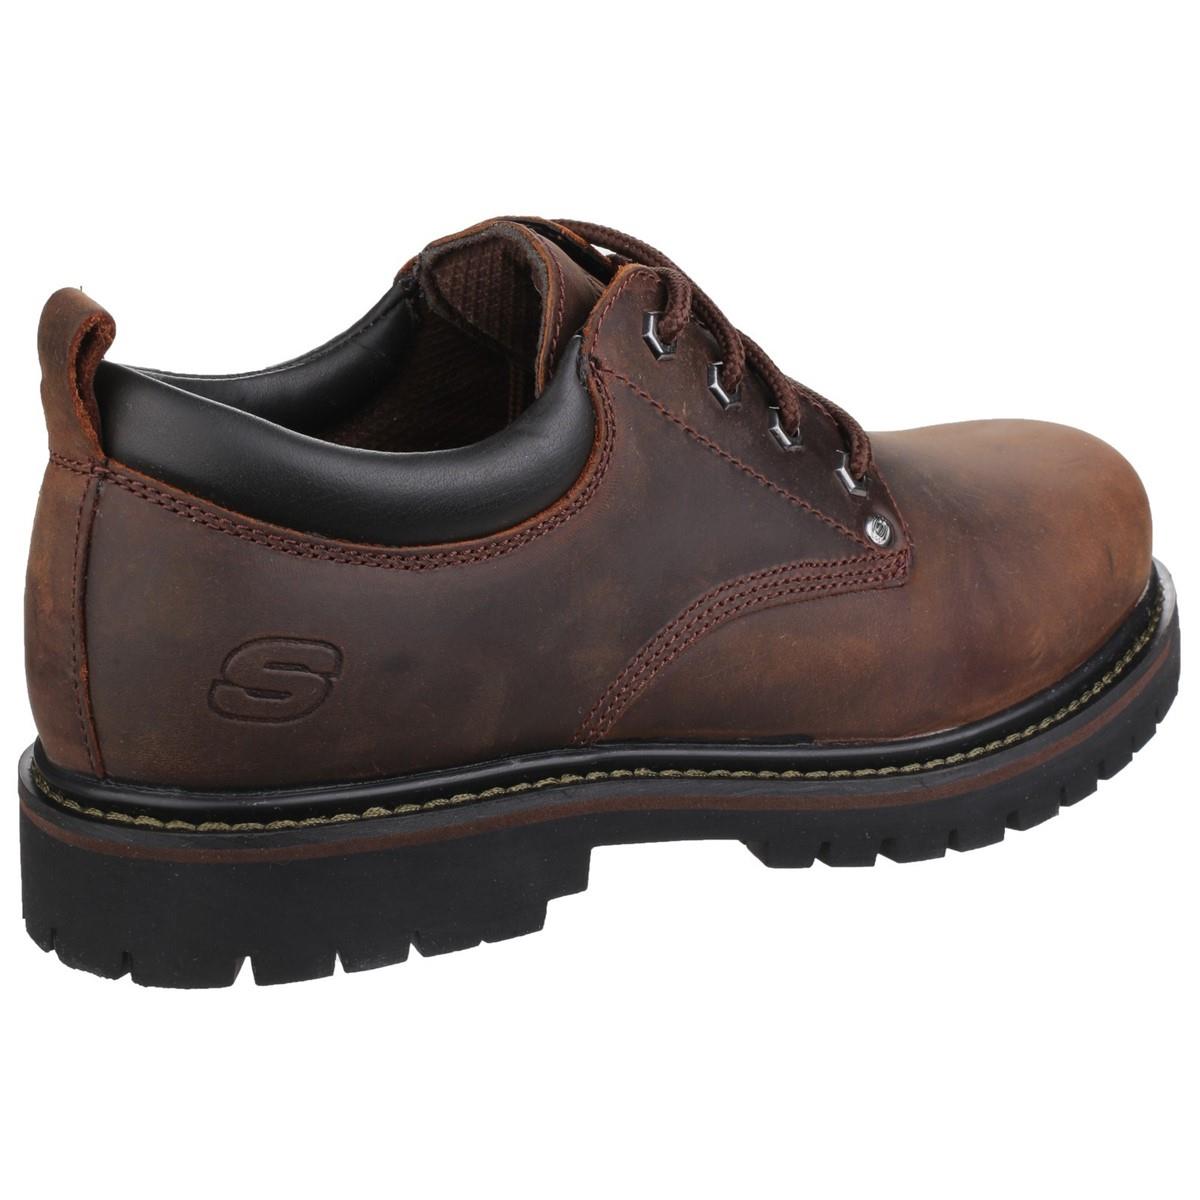 Skechers Tom Cats Mens Lace Up Shoe in Brown-520126 | Shoe Zone